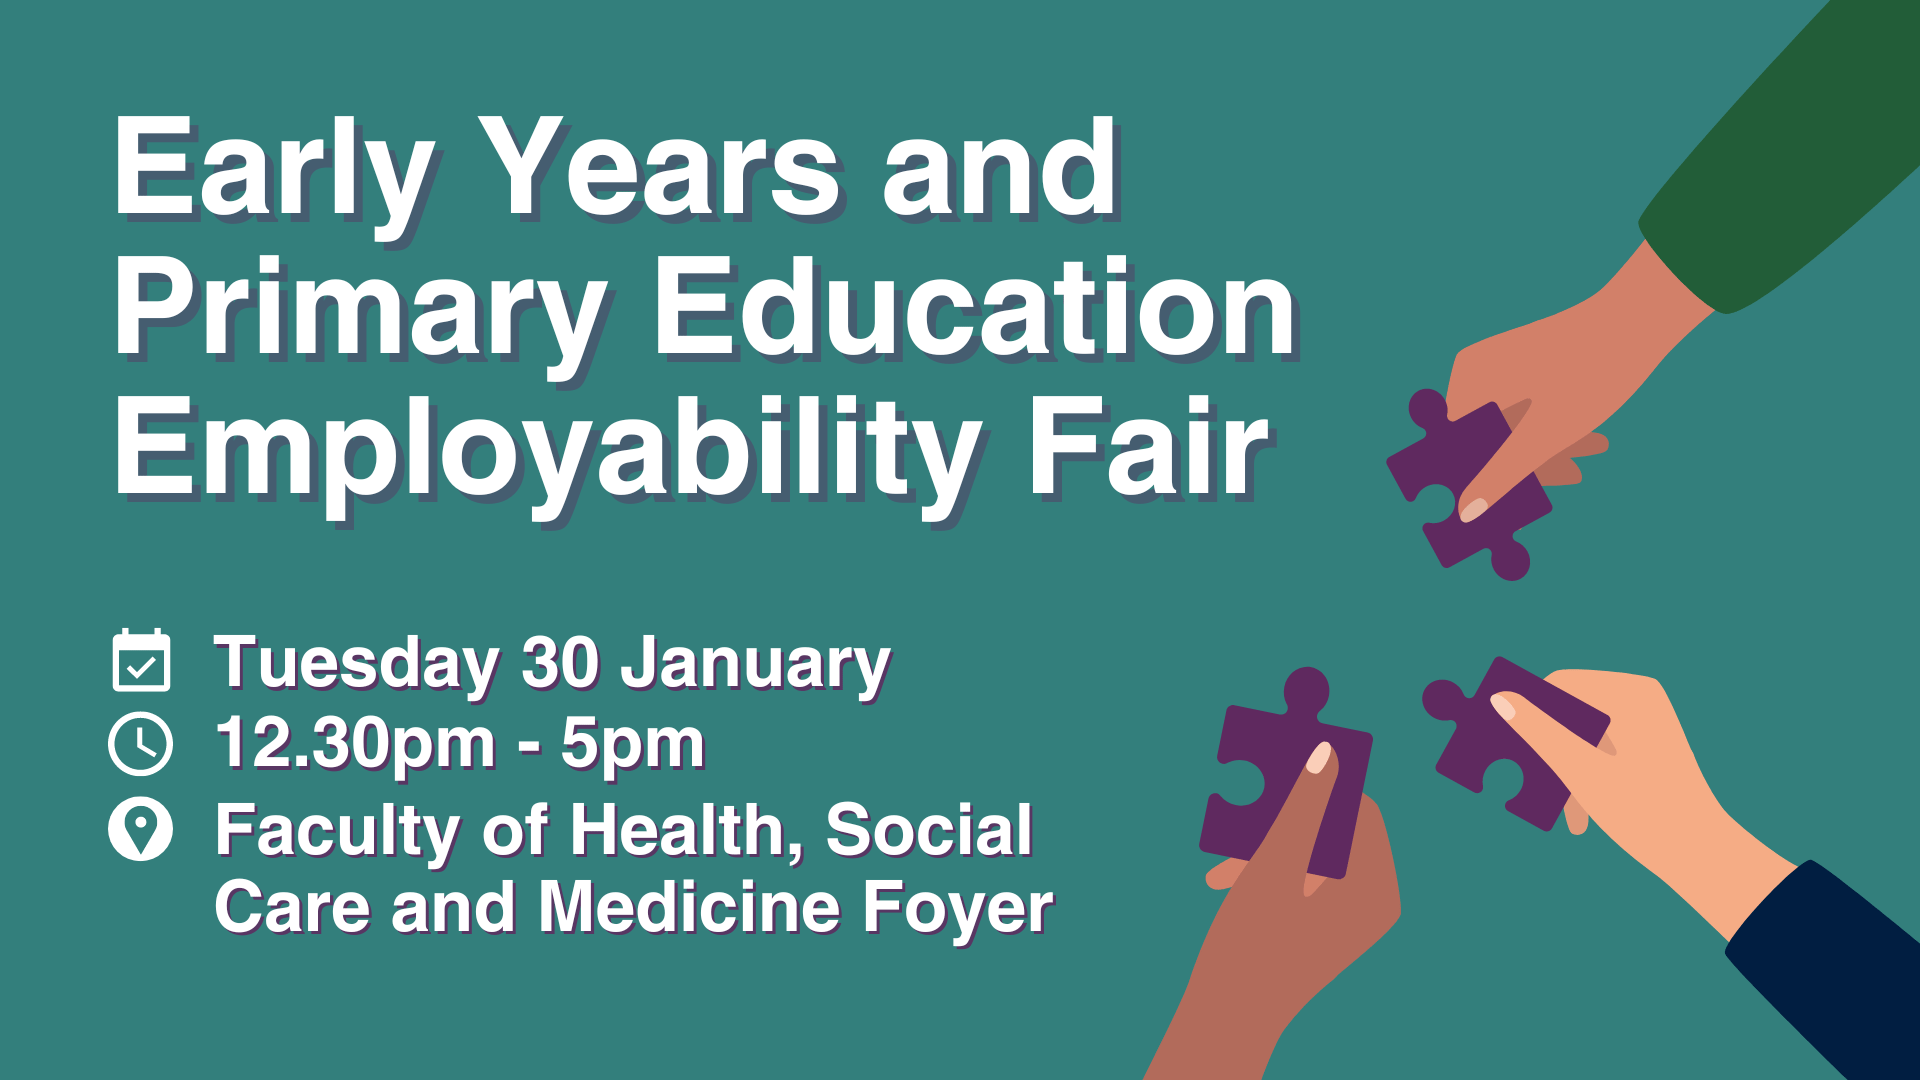 Early years and primary employability fair: Tuesday 30 January, 12.30pm - 5pm, Faculty